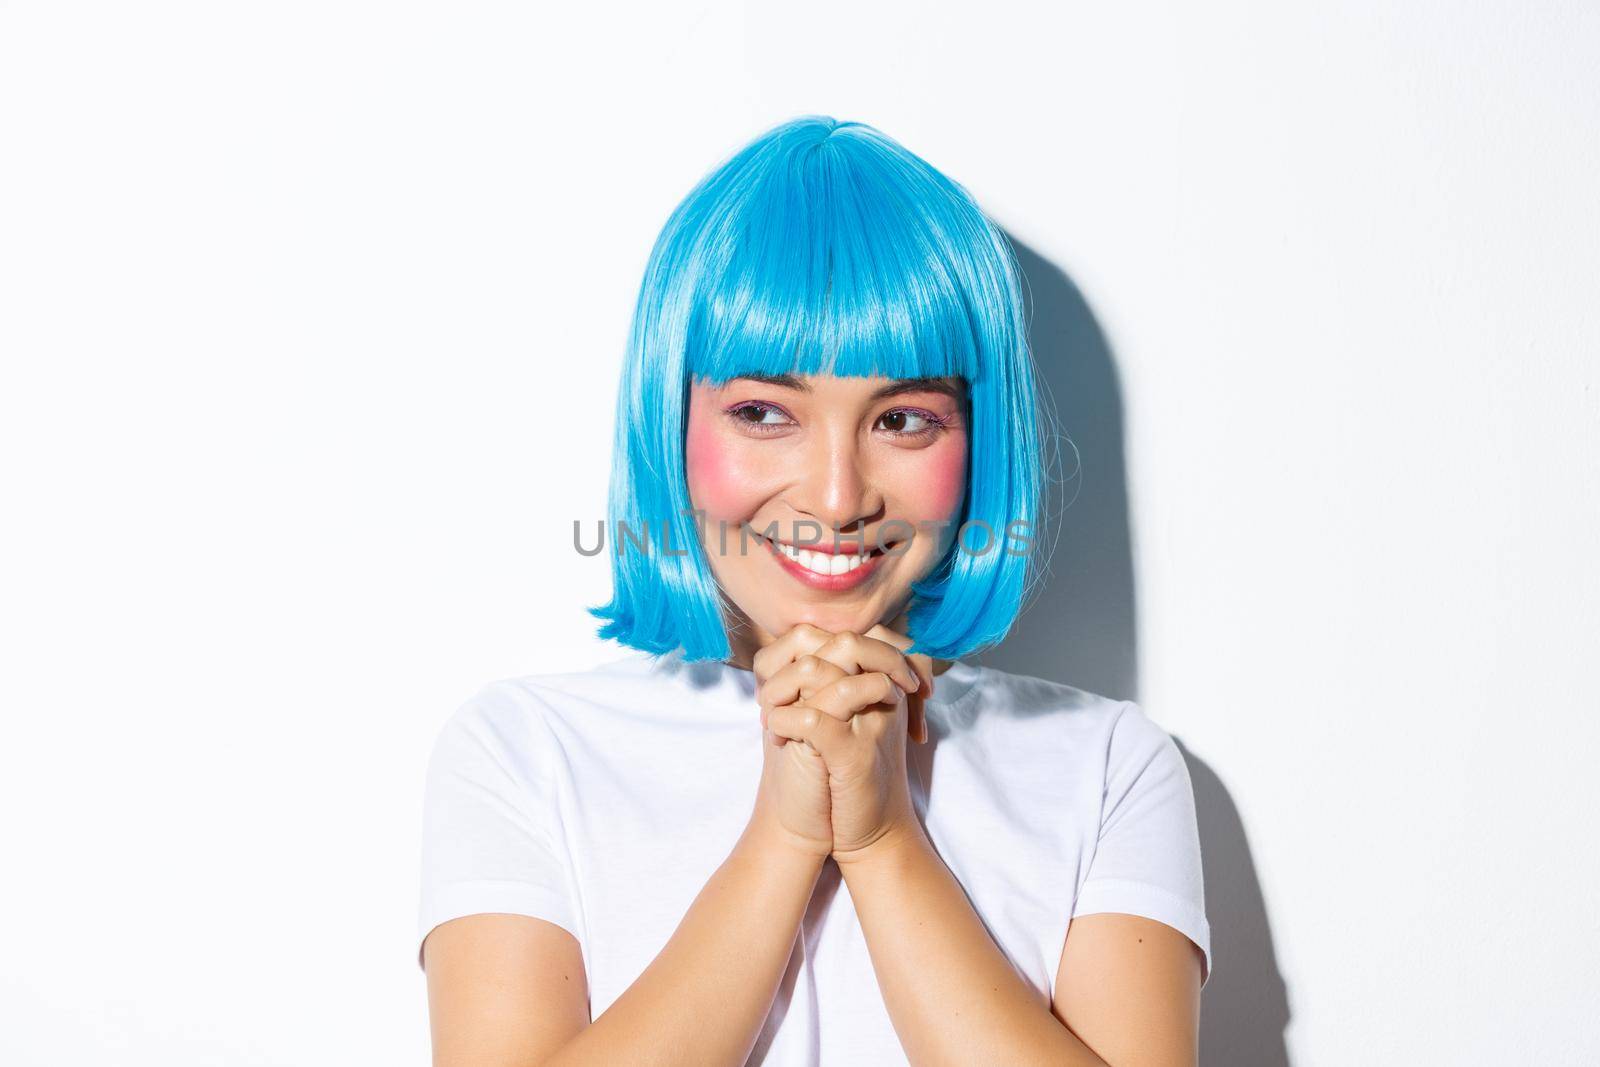 Close-up of adorable dreamy asian girl looking left and smiling, clasping hands together hopeful, wearing blue wig for halloween party, standing over white background.